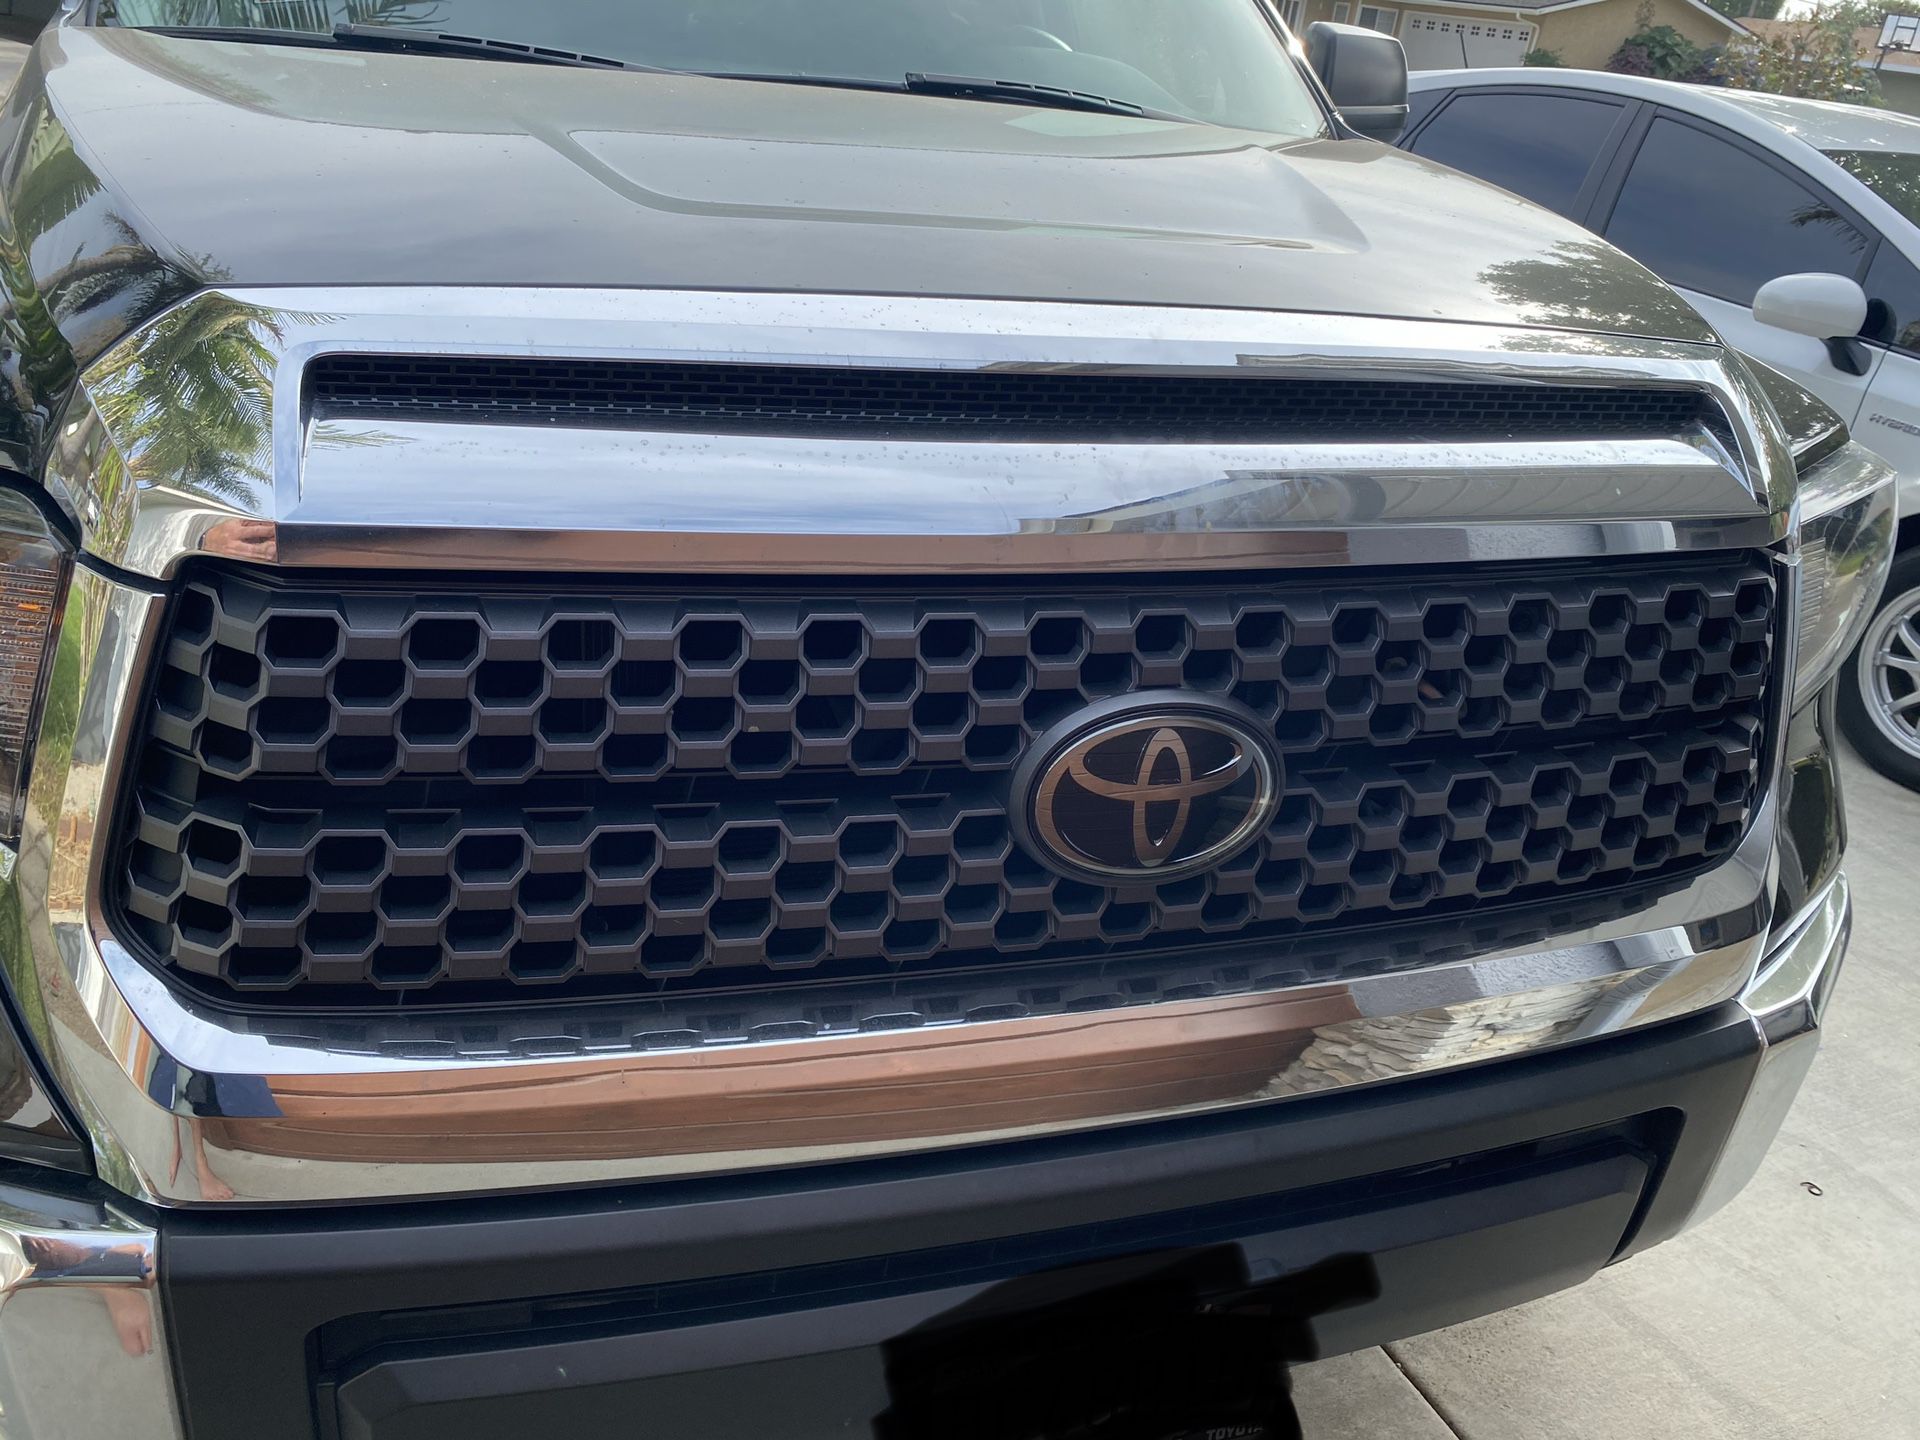 2018 tundra grill and hood scoop